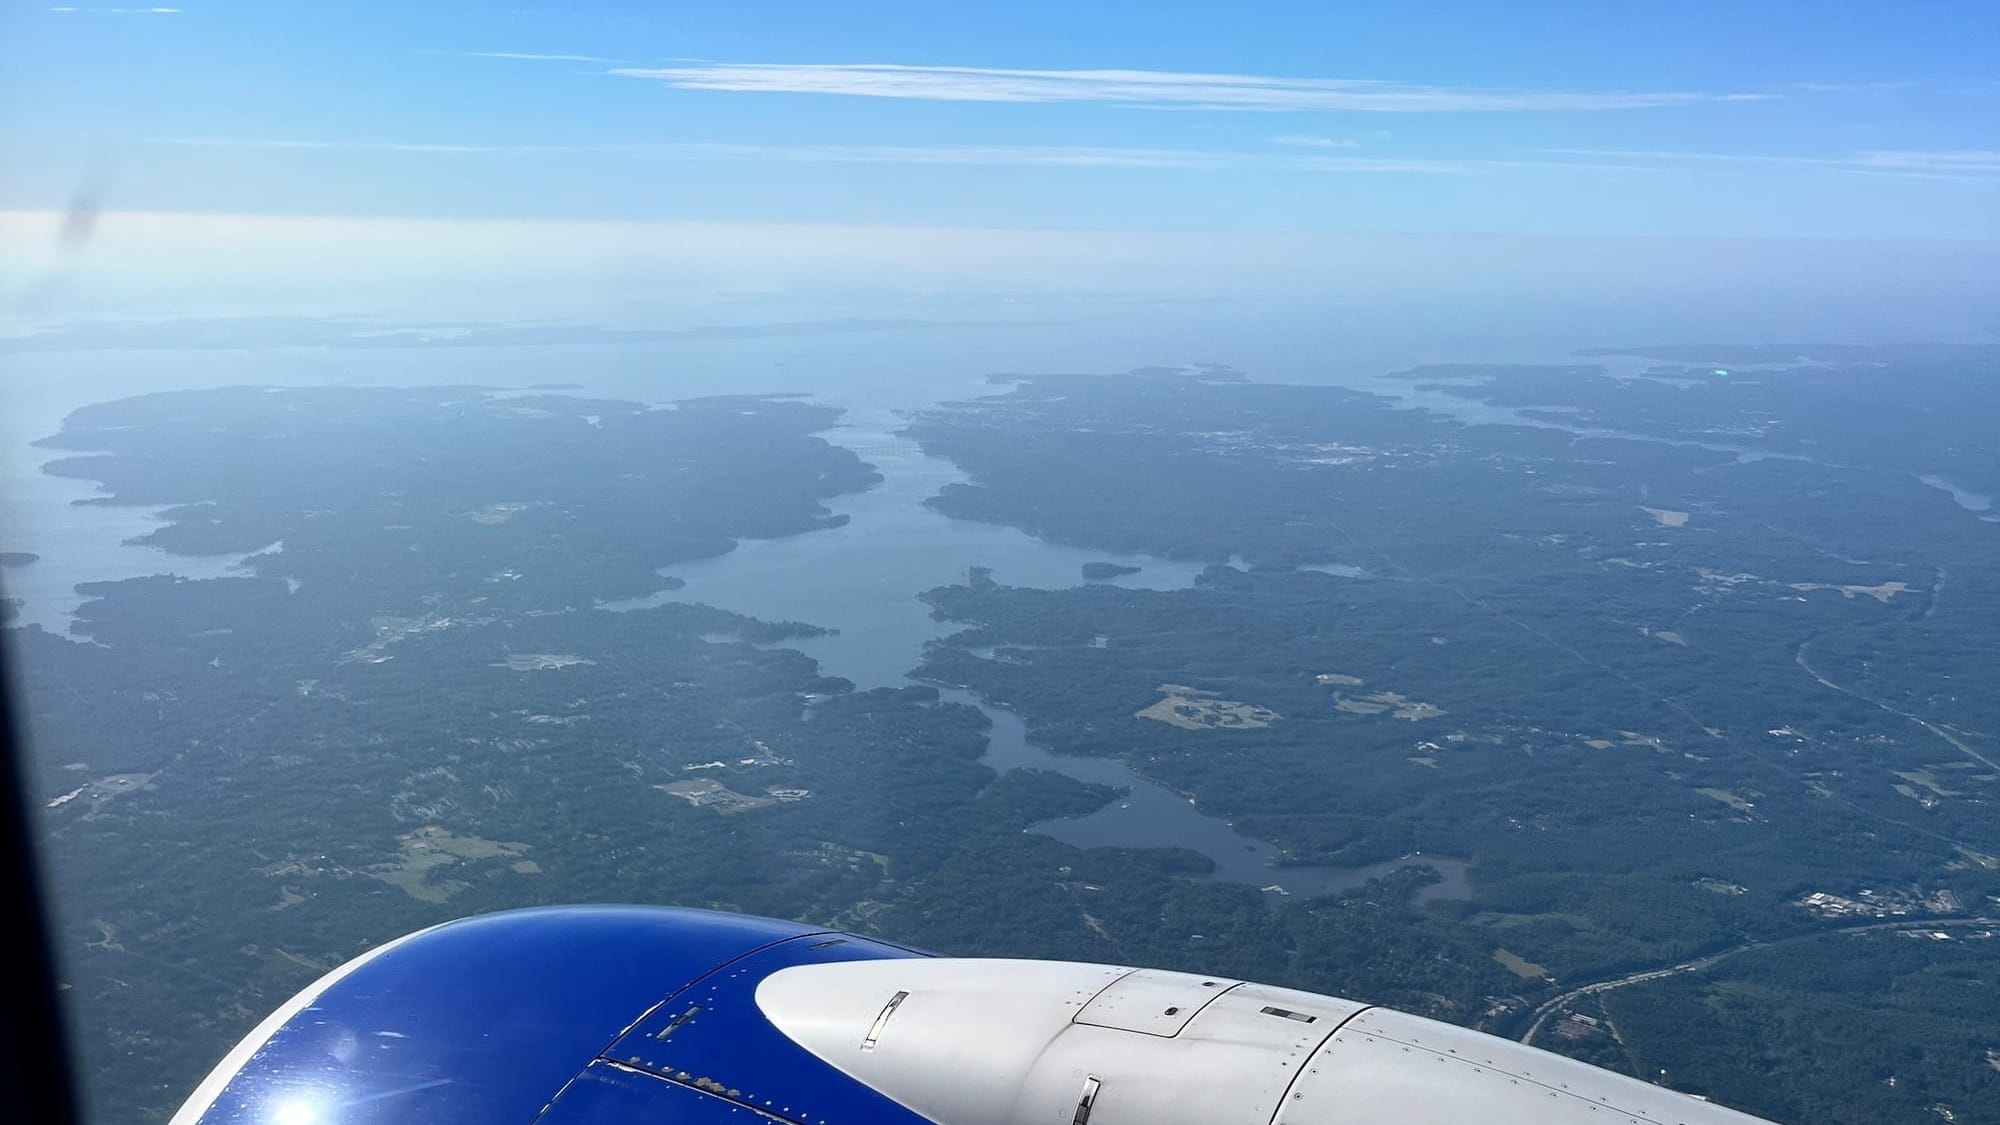 The top of a jet engine in the foreground, the left part of it painted blue, and beyond and below an inlet snaking through green land to a coastline full of other inlets, and the sea and haze and sky beyond. 